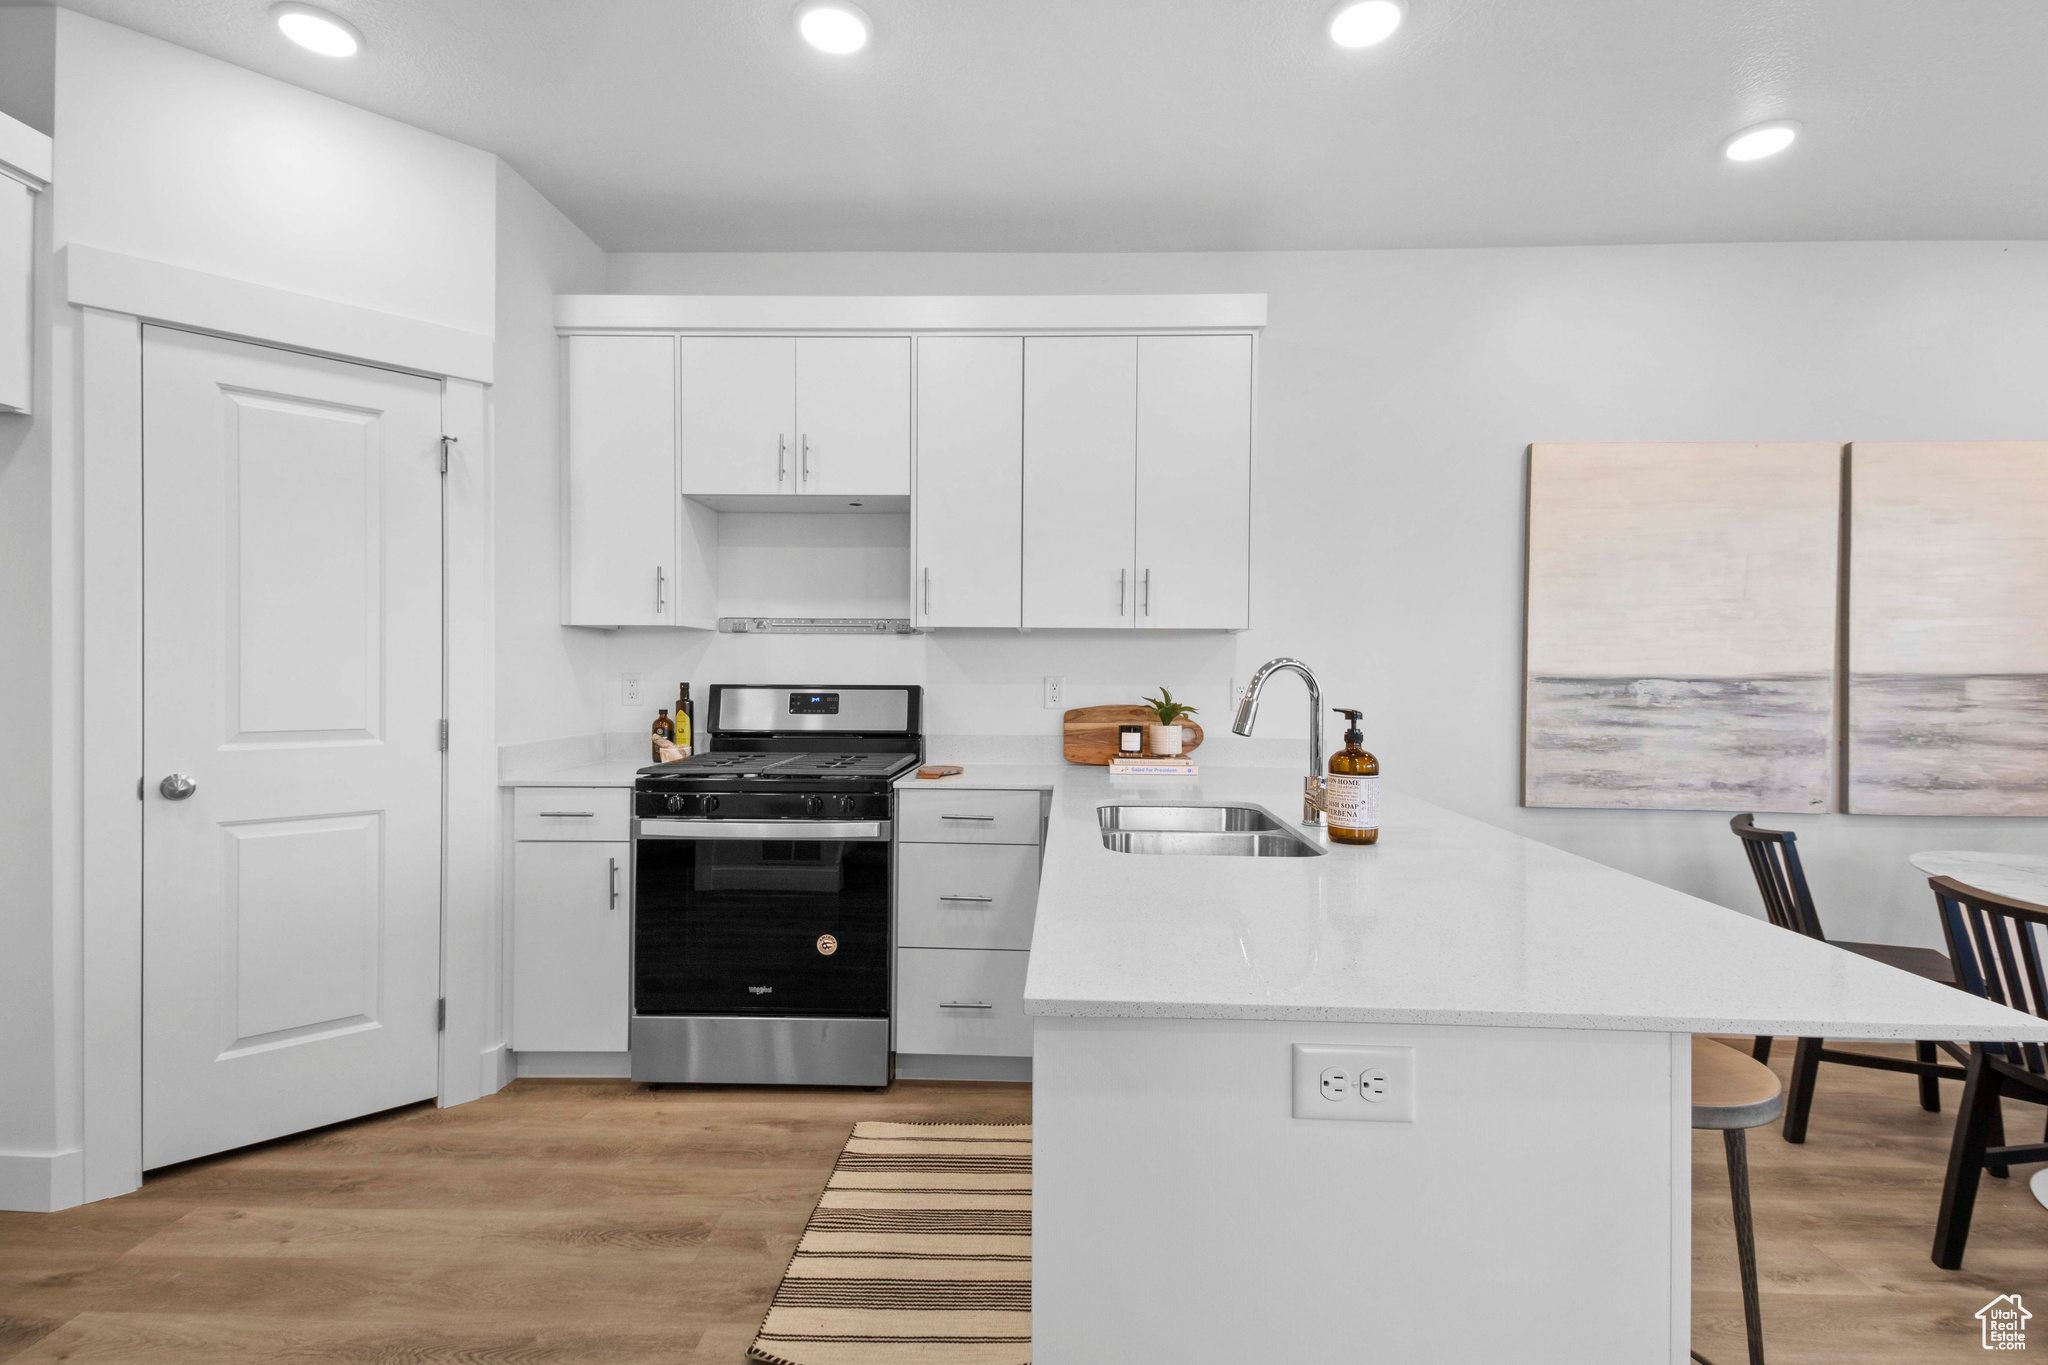 Kitchen with sink, a breakfast bar area, light hardwood / wood-style floors, white cabinetry, and stainless steel gas range